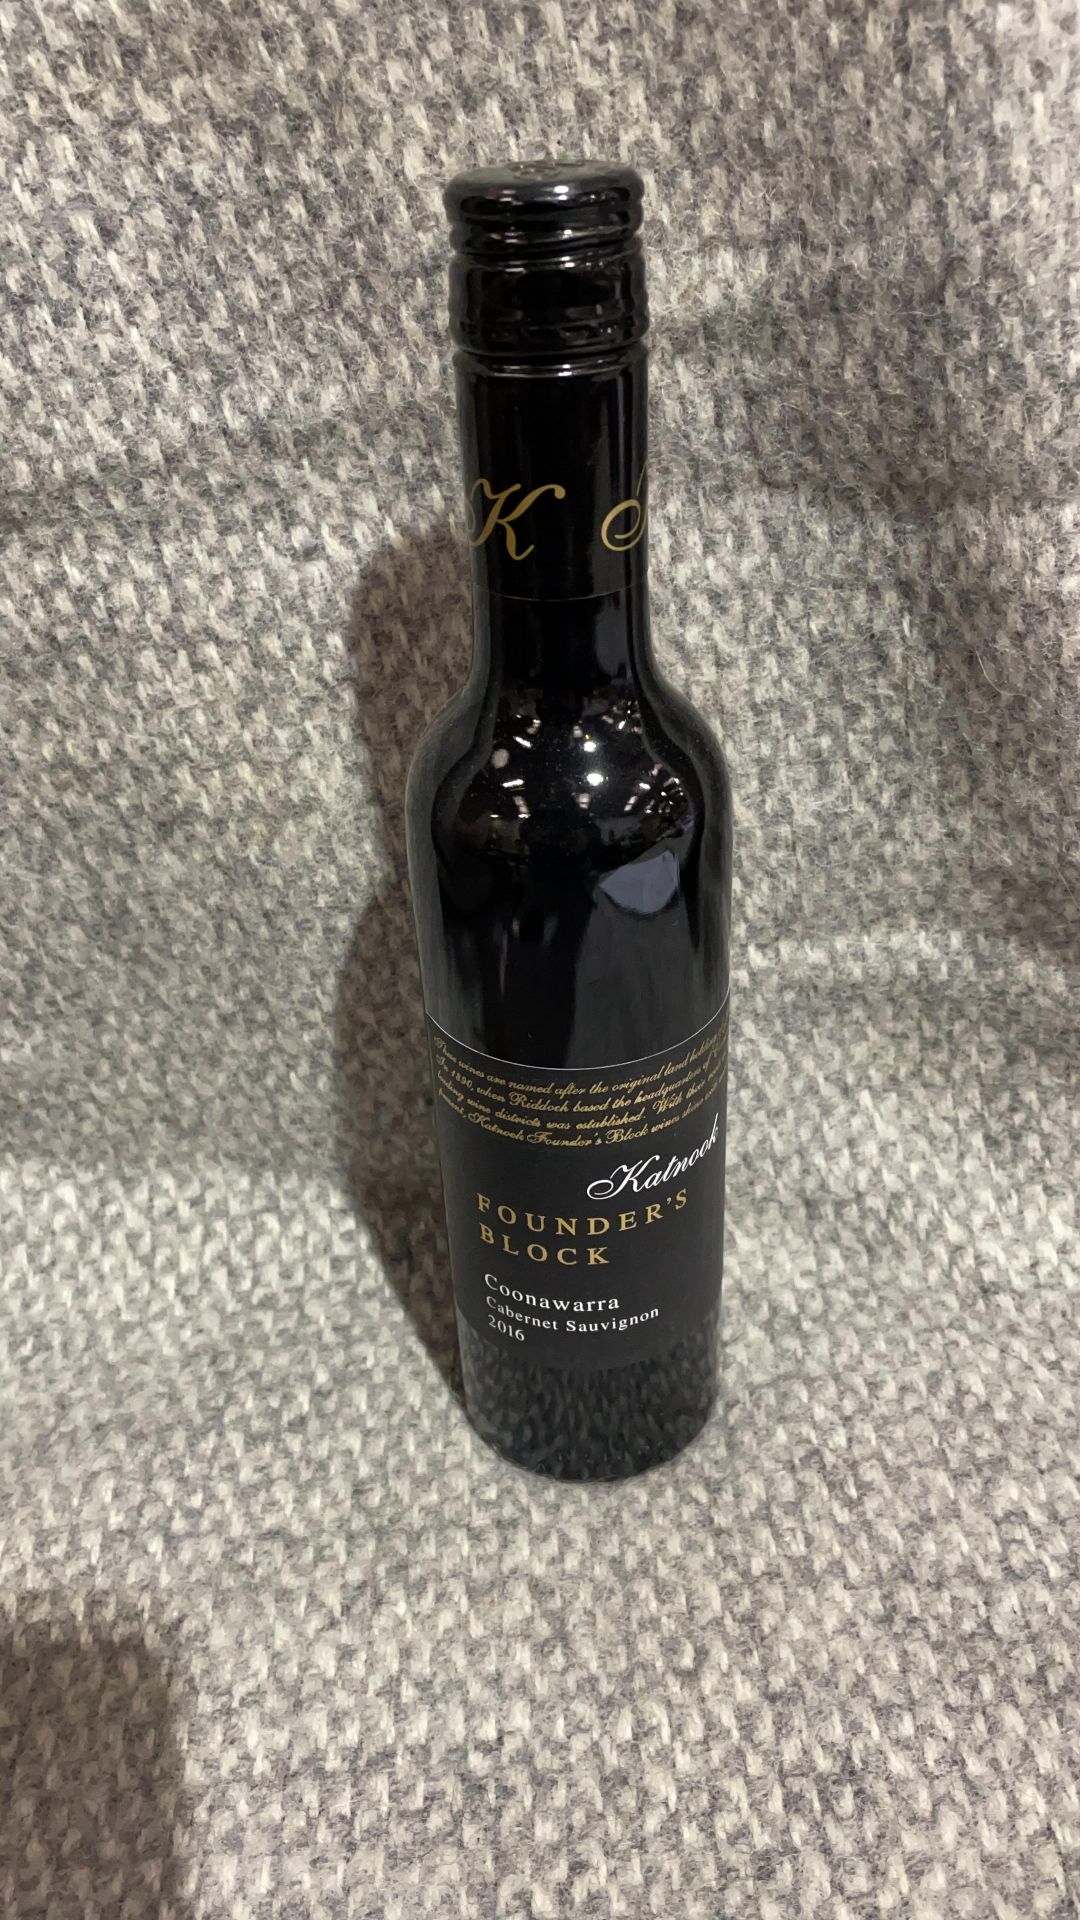 Founder's Block Cabernet Sauvignon 2016 375ml ( Bid Is For 1x Bottle Option To Purchase More)